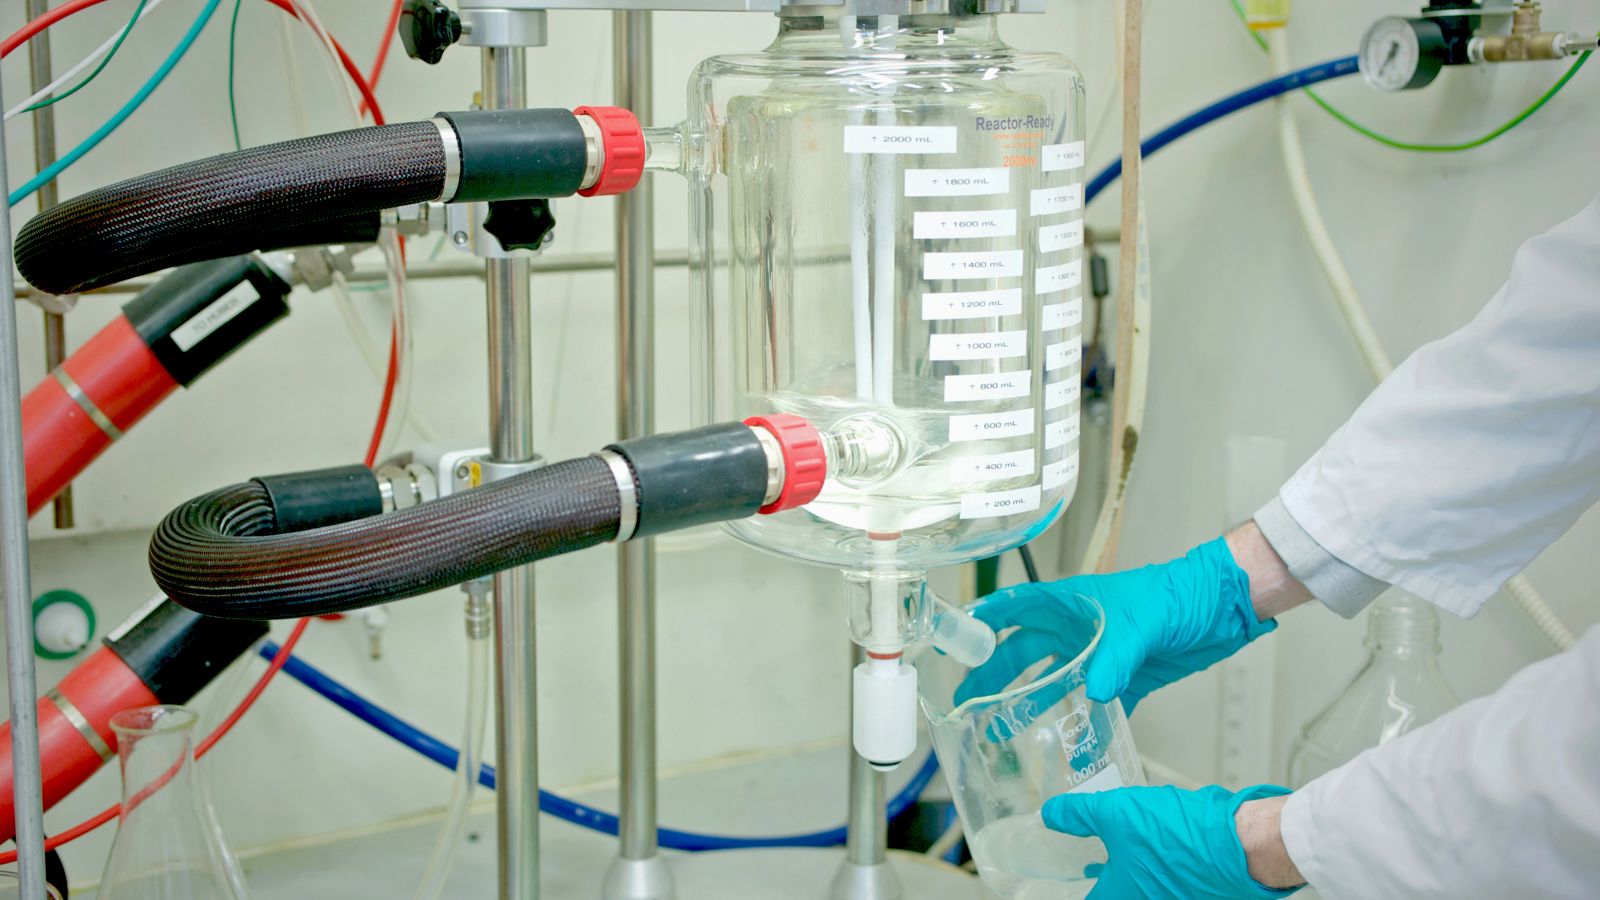 A scientist wears blue gloves and holds a beaker below a larger clear flask of fluid with hoses attached to it.